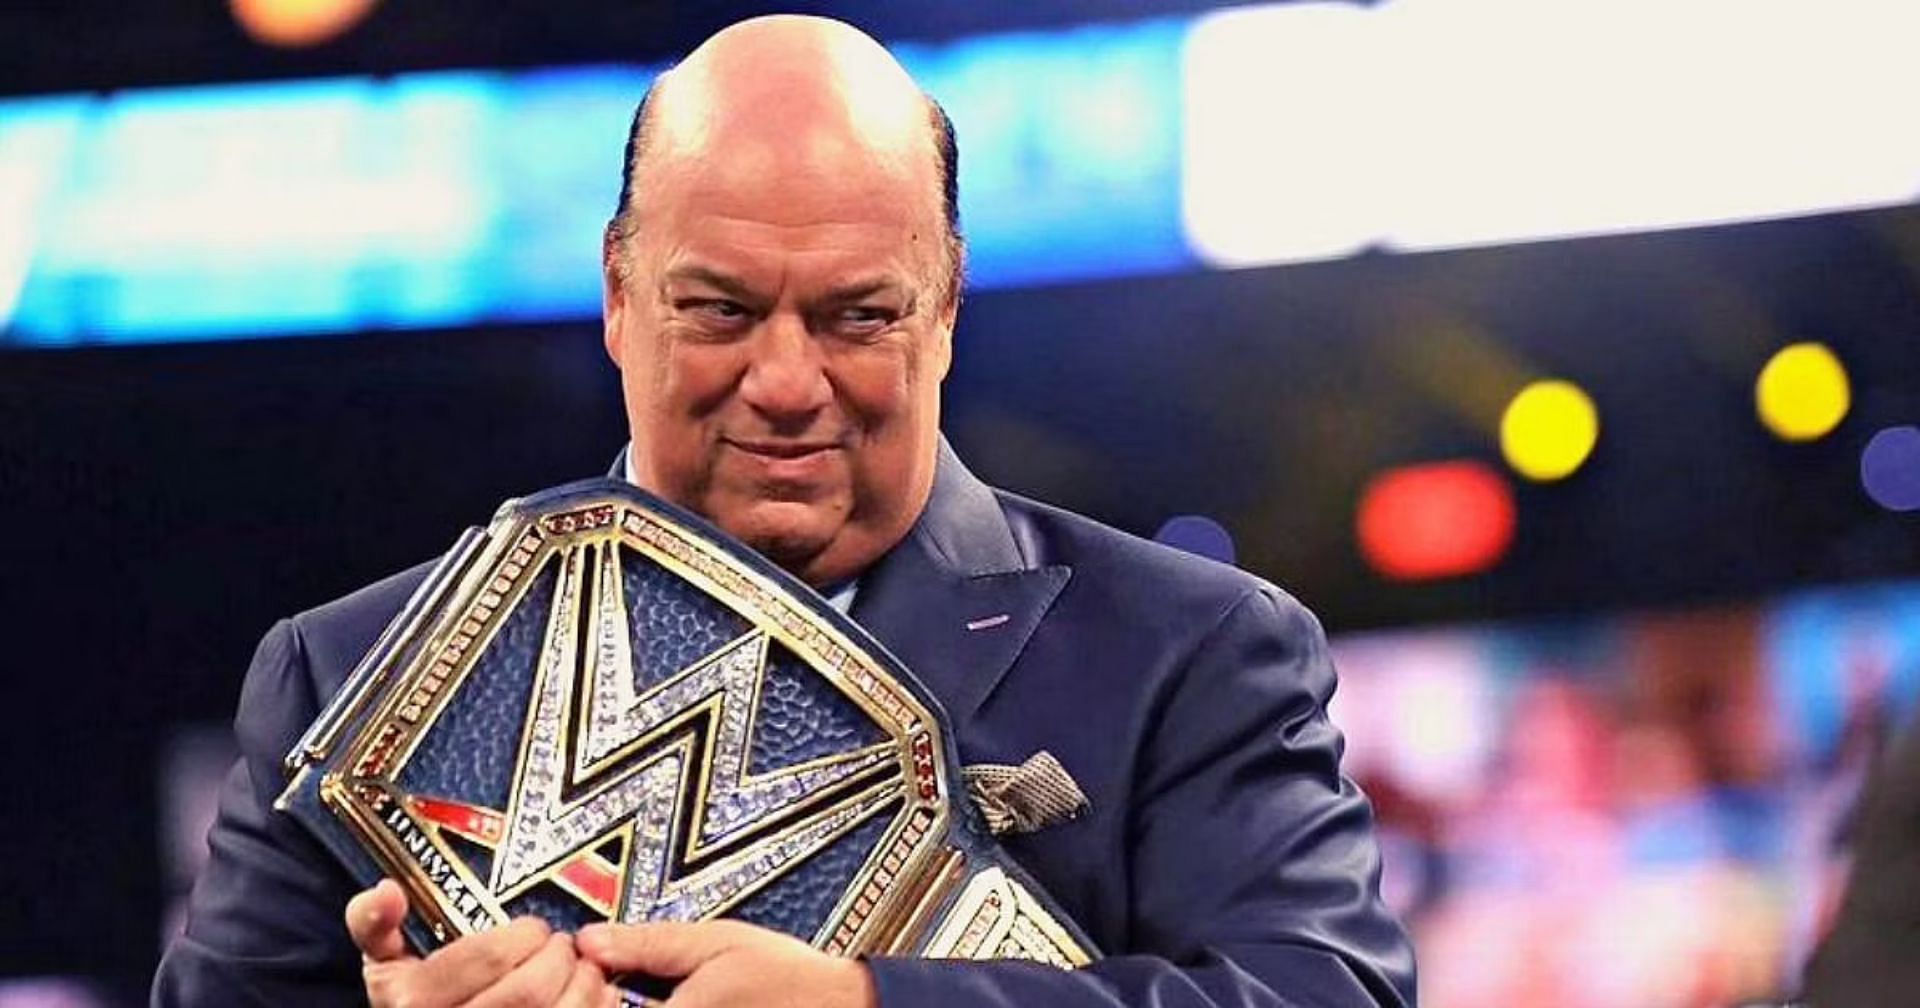 Paul Heyman is the Special Counsel to Roman Reigns